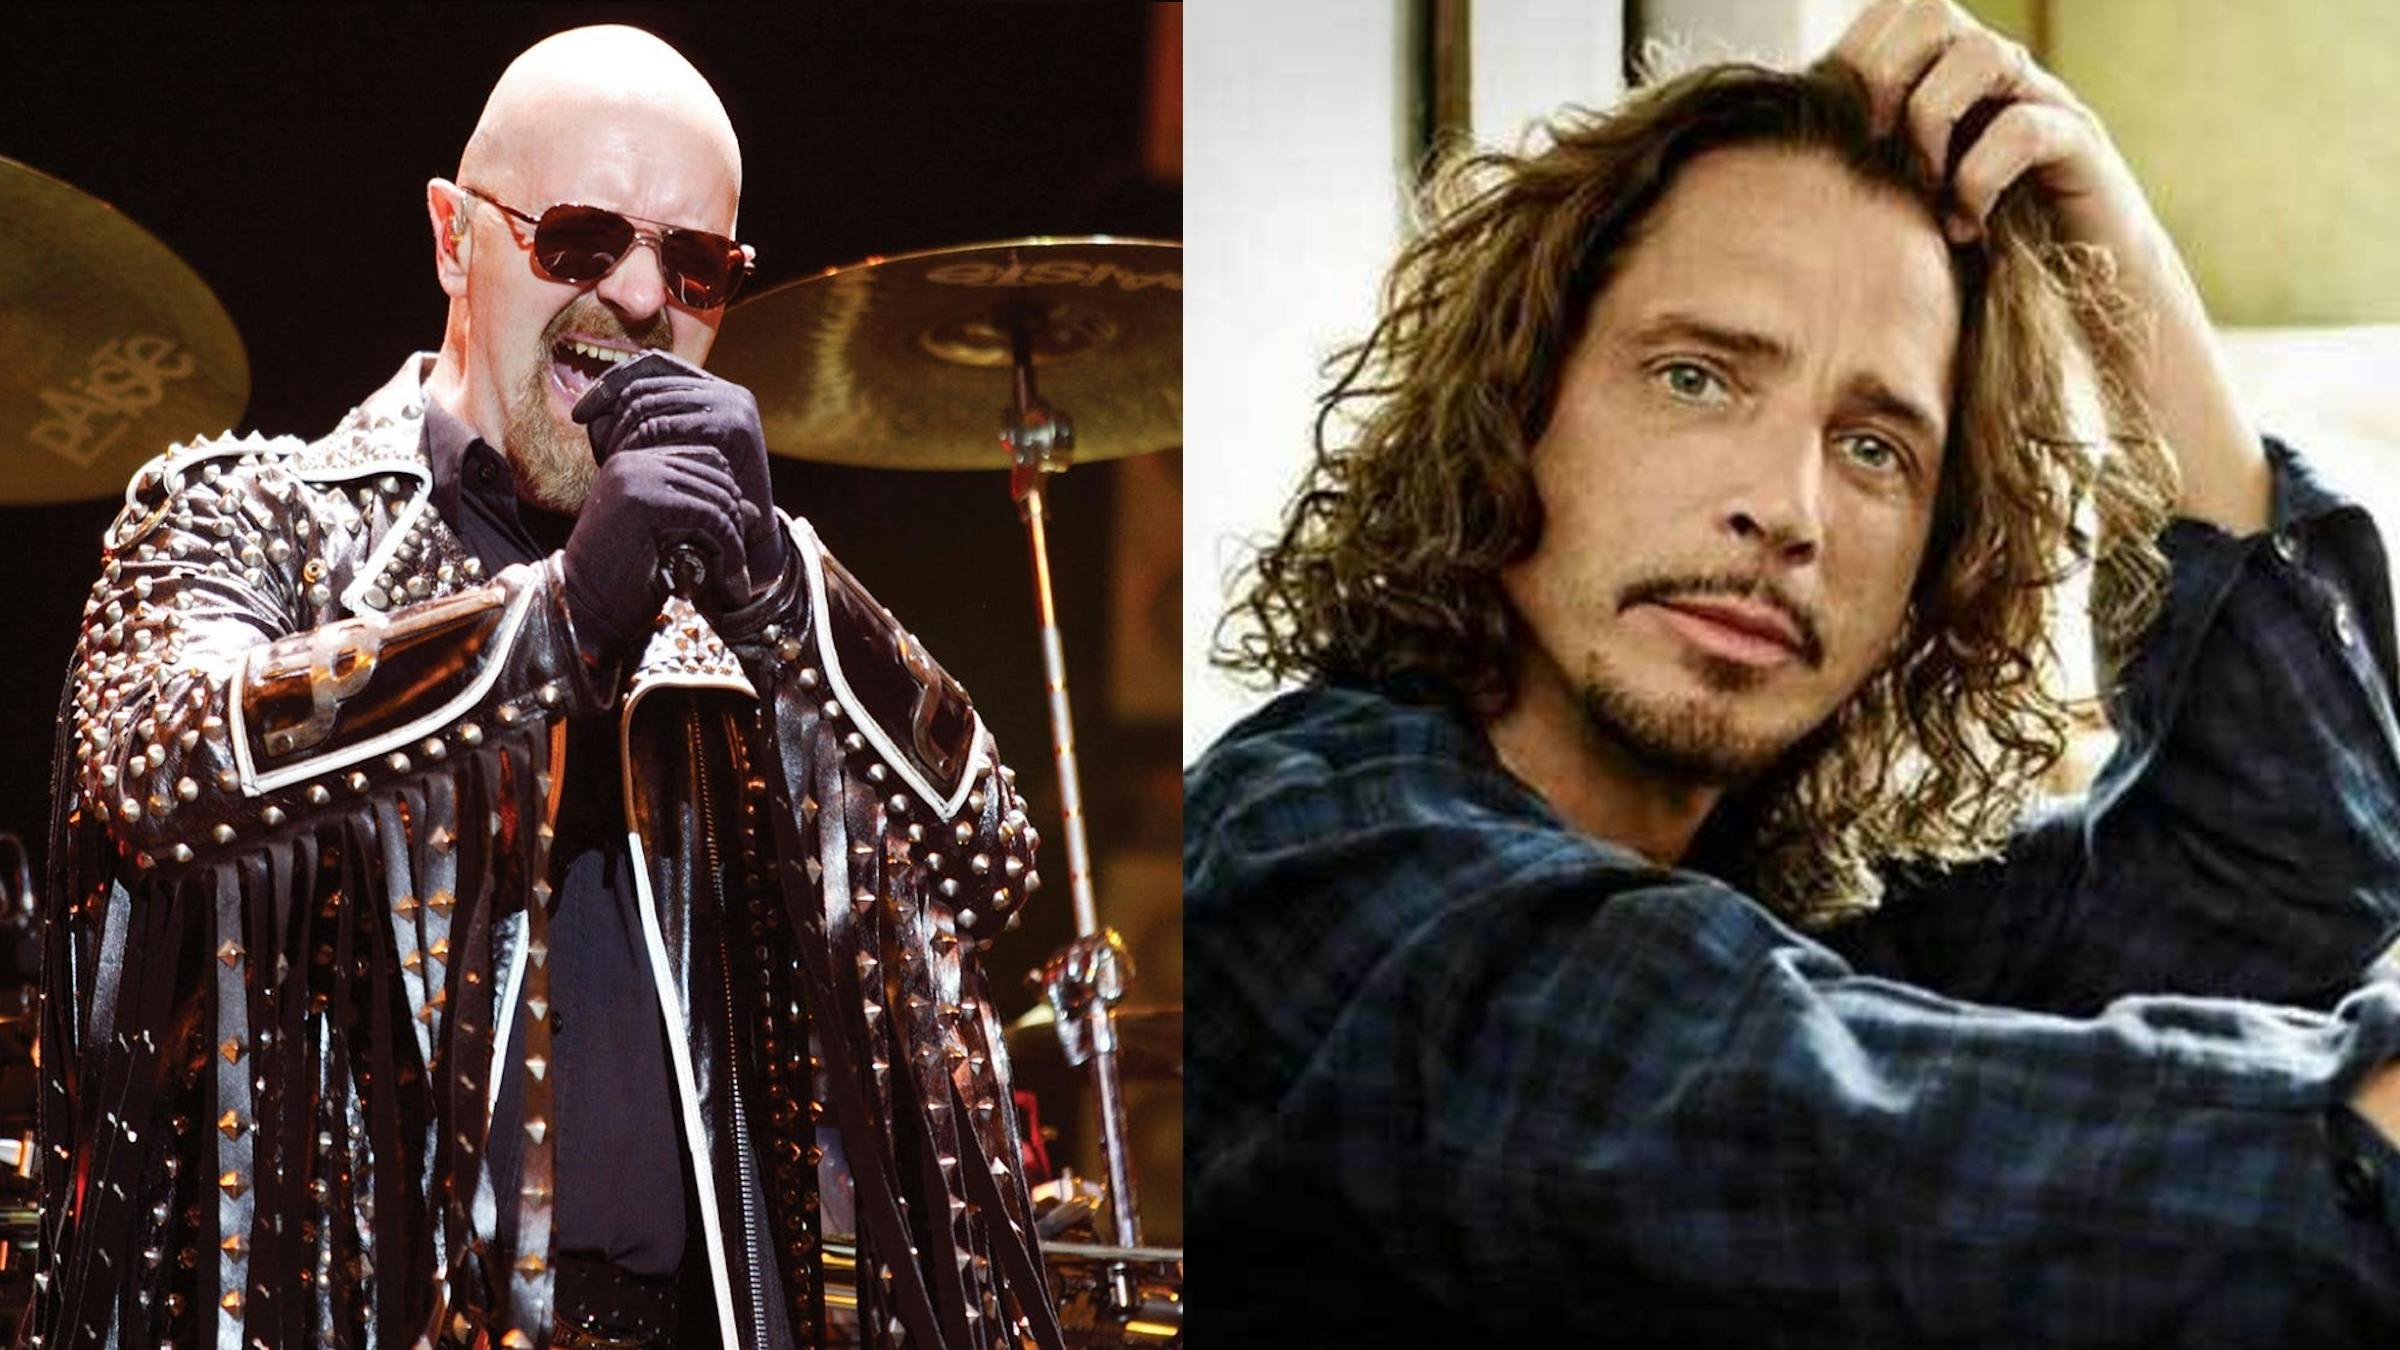 Judas Priest And Soundgarden Made The Rock And Roll Hall Of Fame Short List